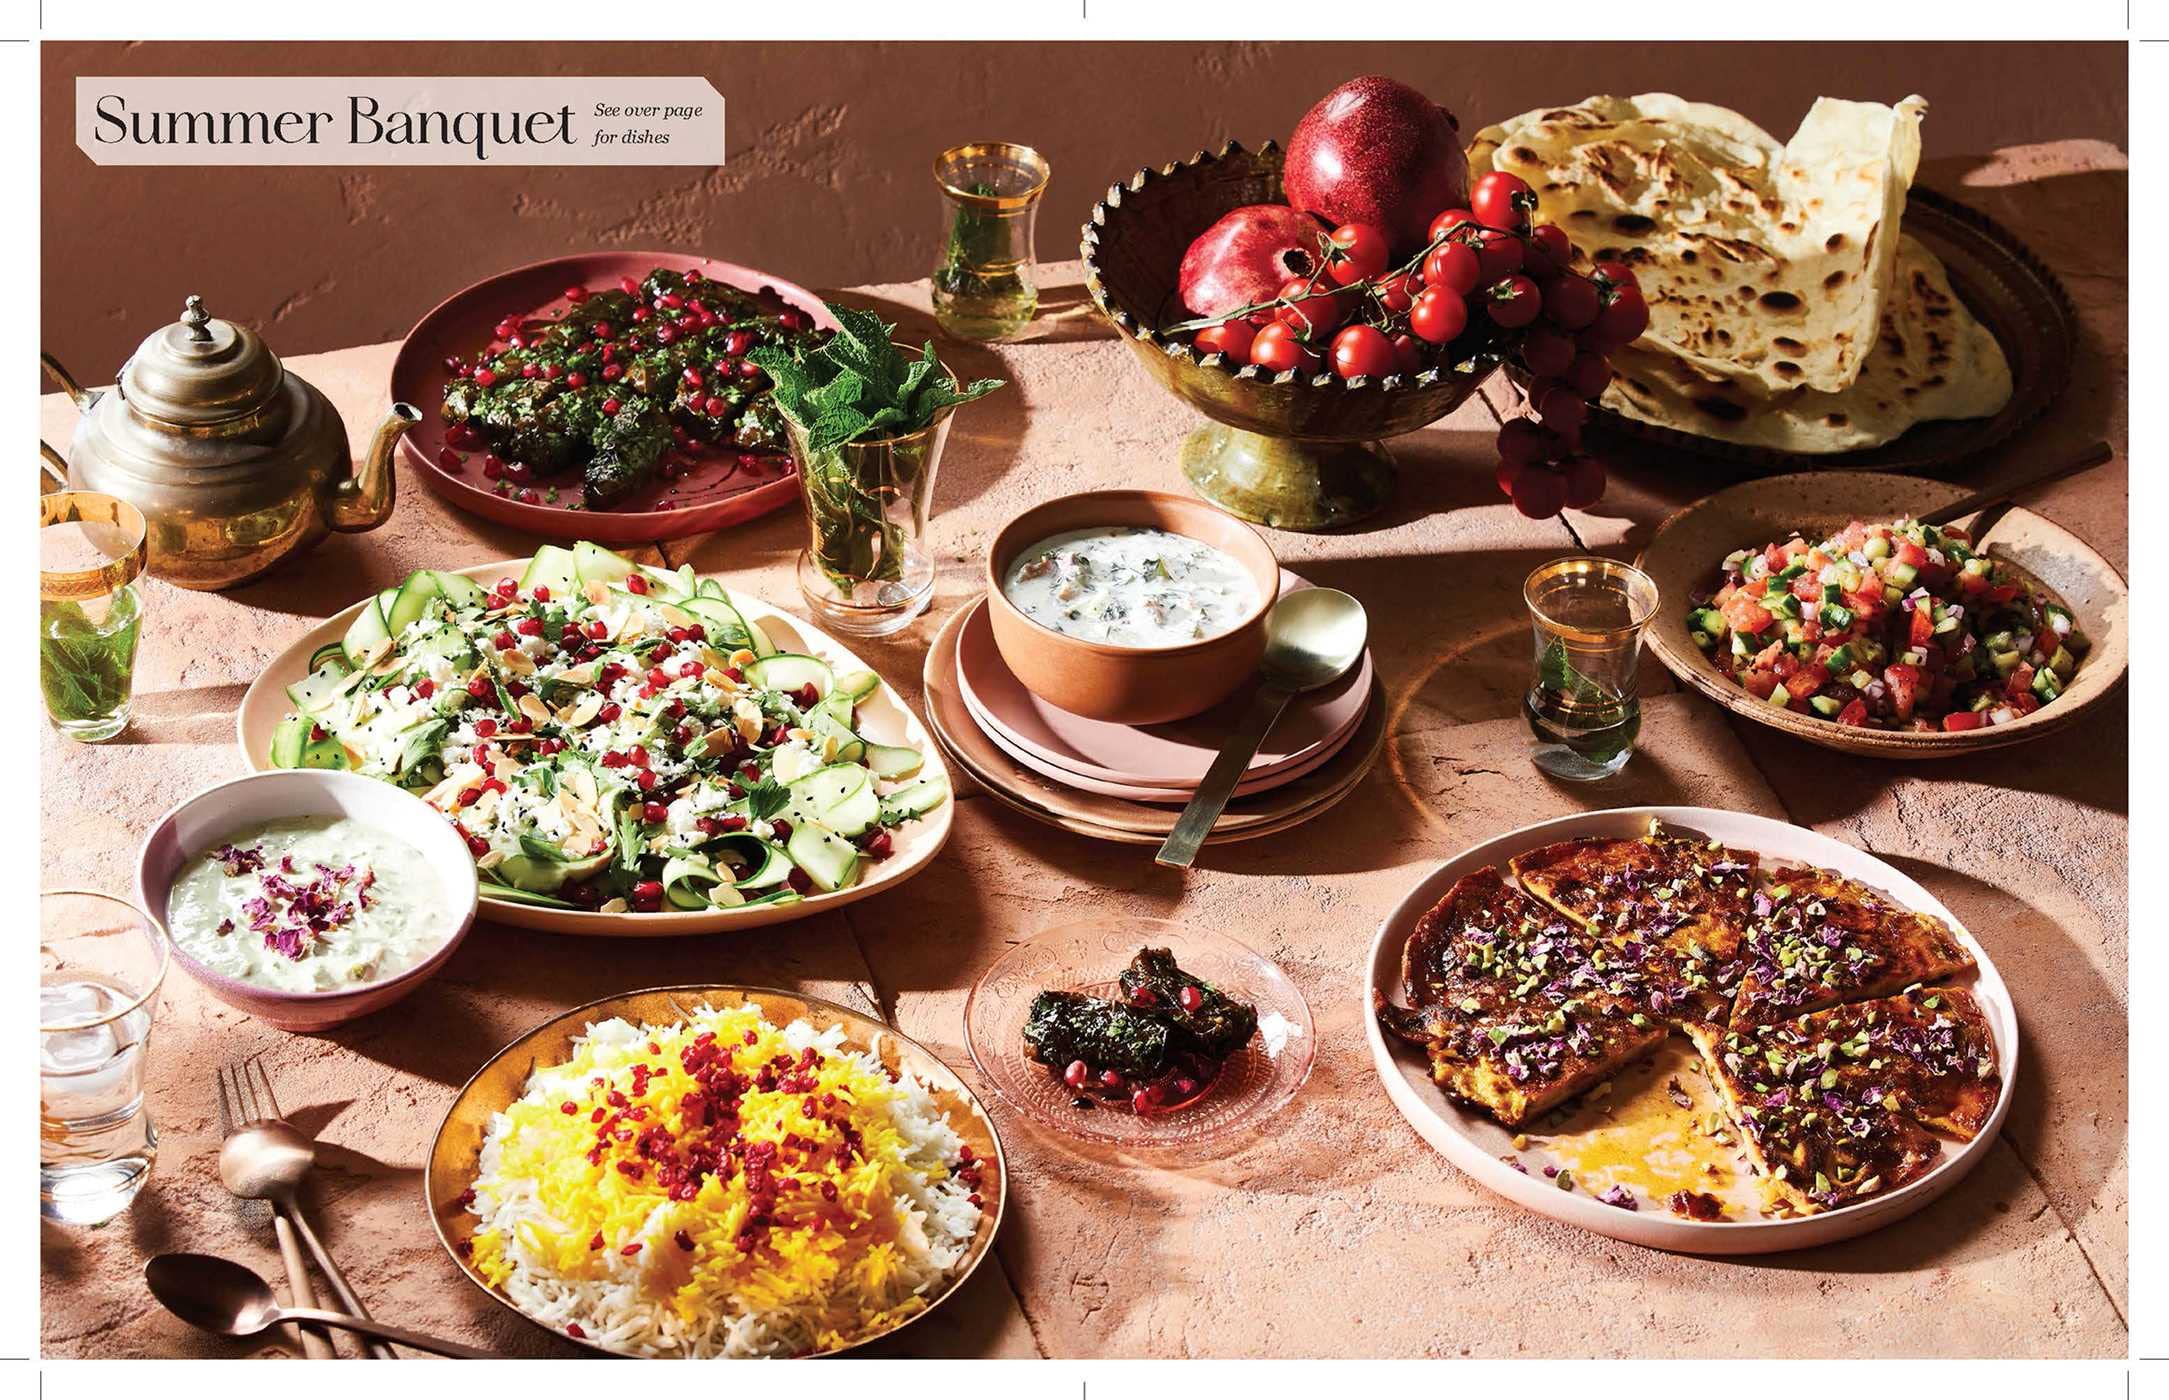 Salamati: Hamed's Persian Kitchen: Recipes and Stories from Iran to the Other Side of the World (Hamed Allahyari, Dani Valent)